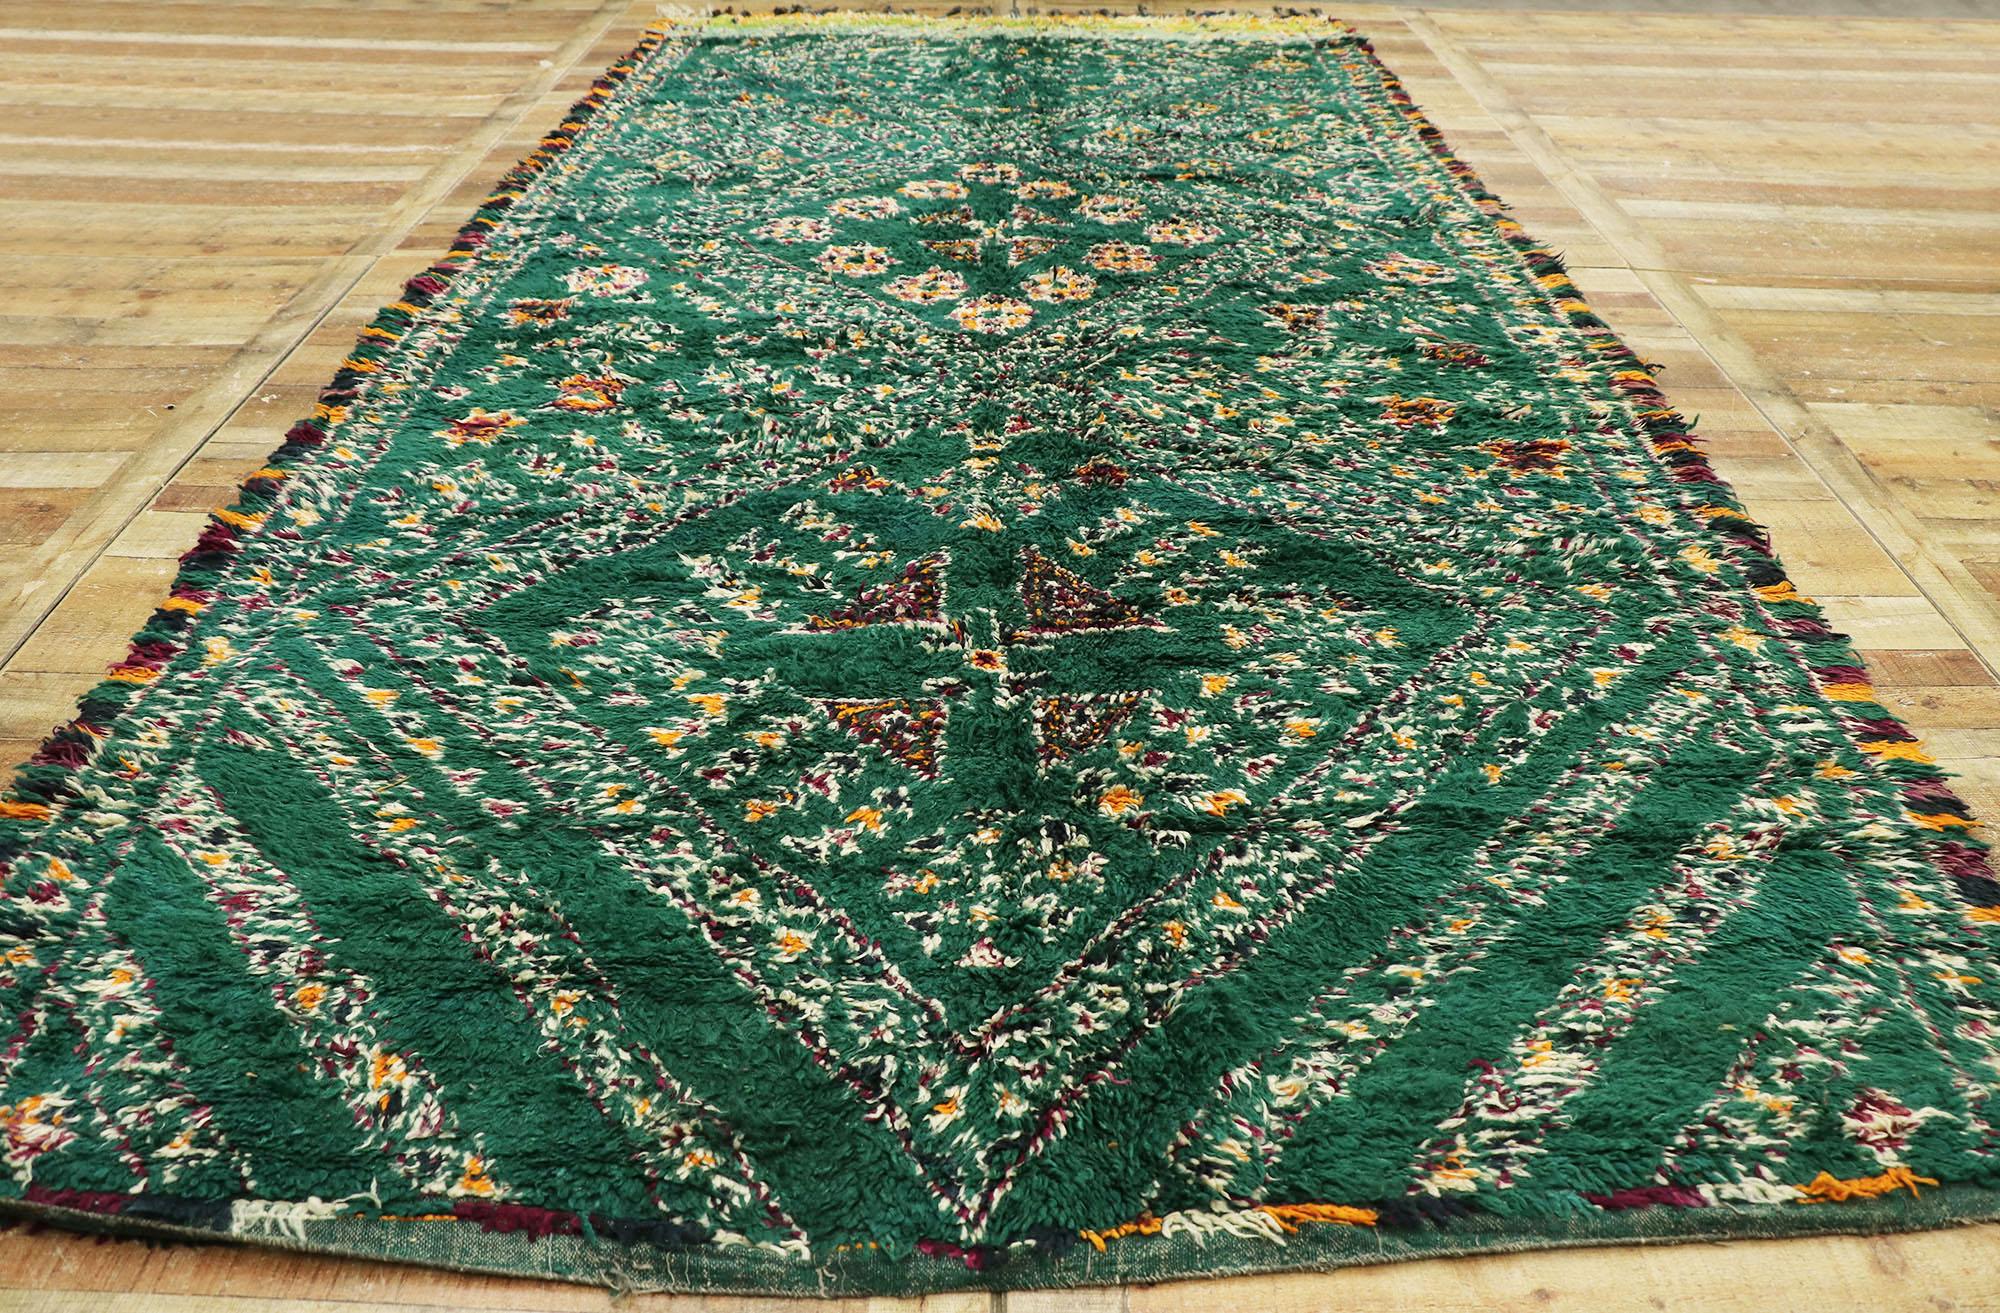 Wool Vintage Green Beni M'Guild Moroccan Rug, Boho Chic Meets Tribal Enchantment For Sale